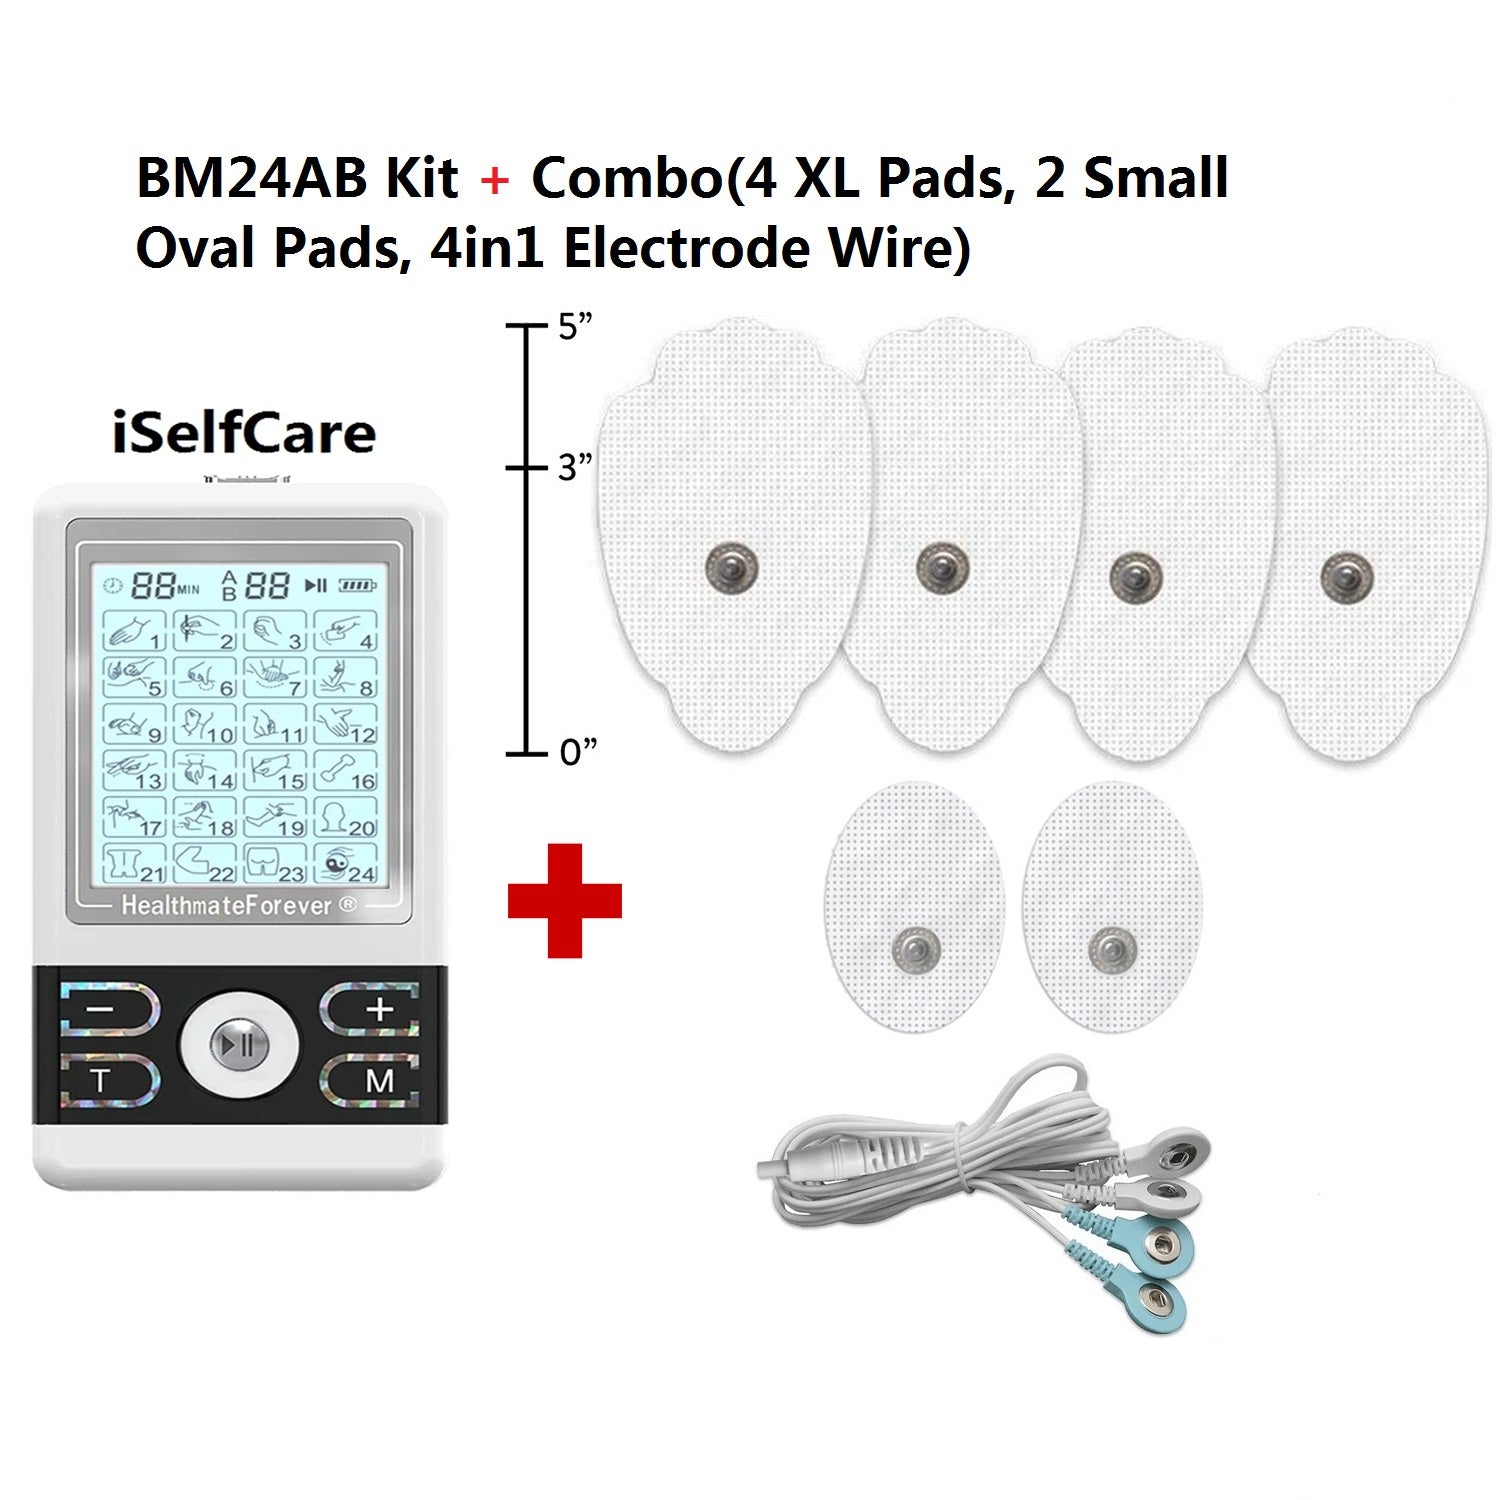 TENS 7000 Official TENS Unit Electrode Pads - 16 Pack, Includes Electrode  Carrying Case, Premium Quality OTC TENS Unit Replacement Pads, 2 X 2 